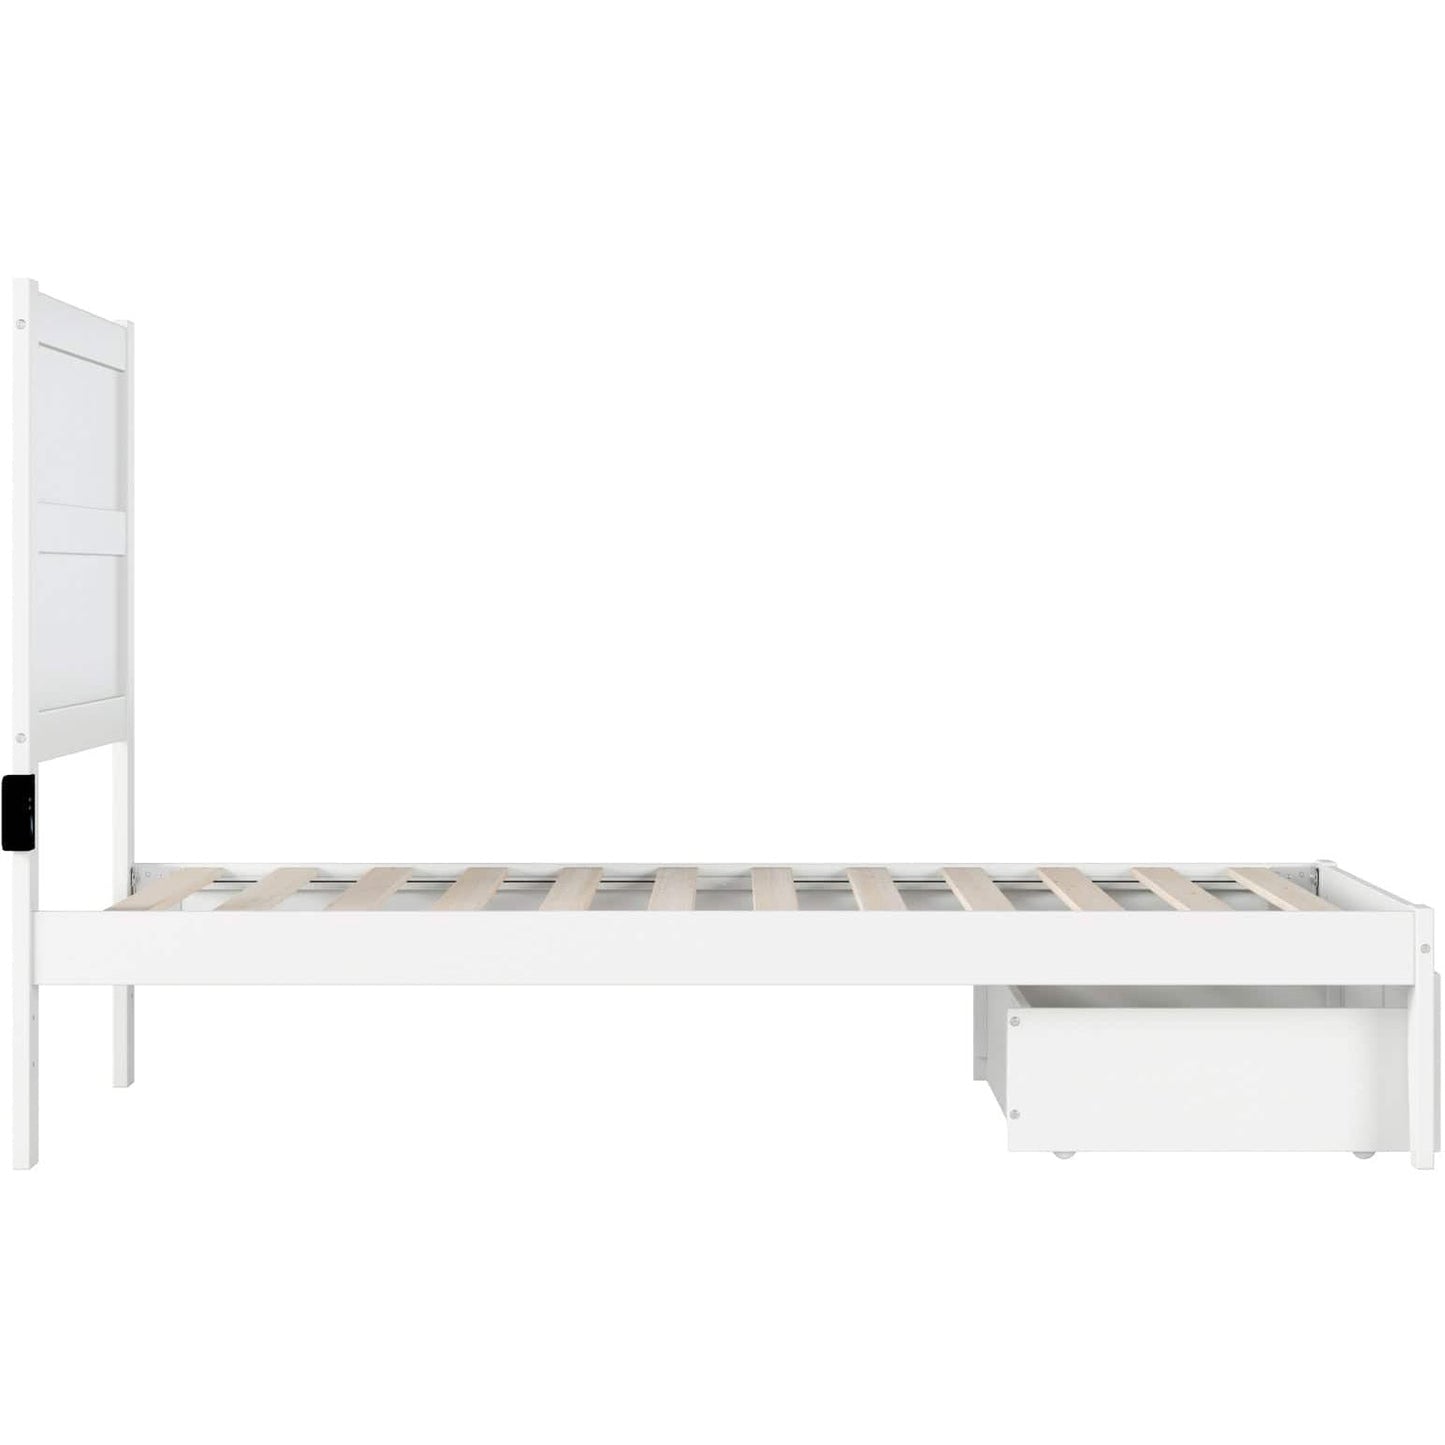 AFI Furnishings NoHo Twin Bed with Foot Drawer in White AG9112222